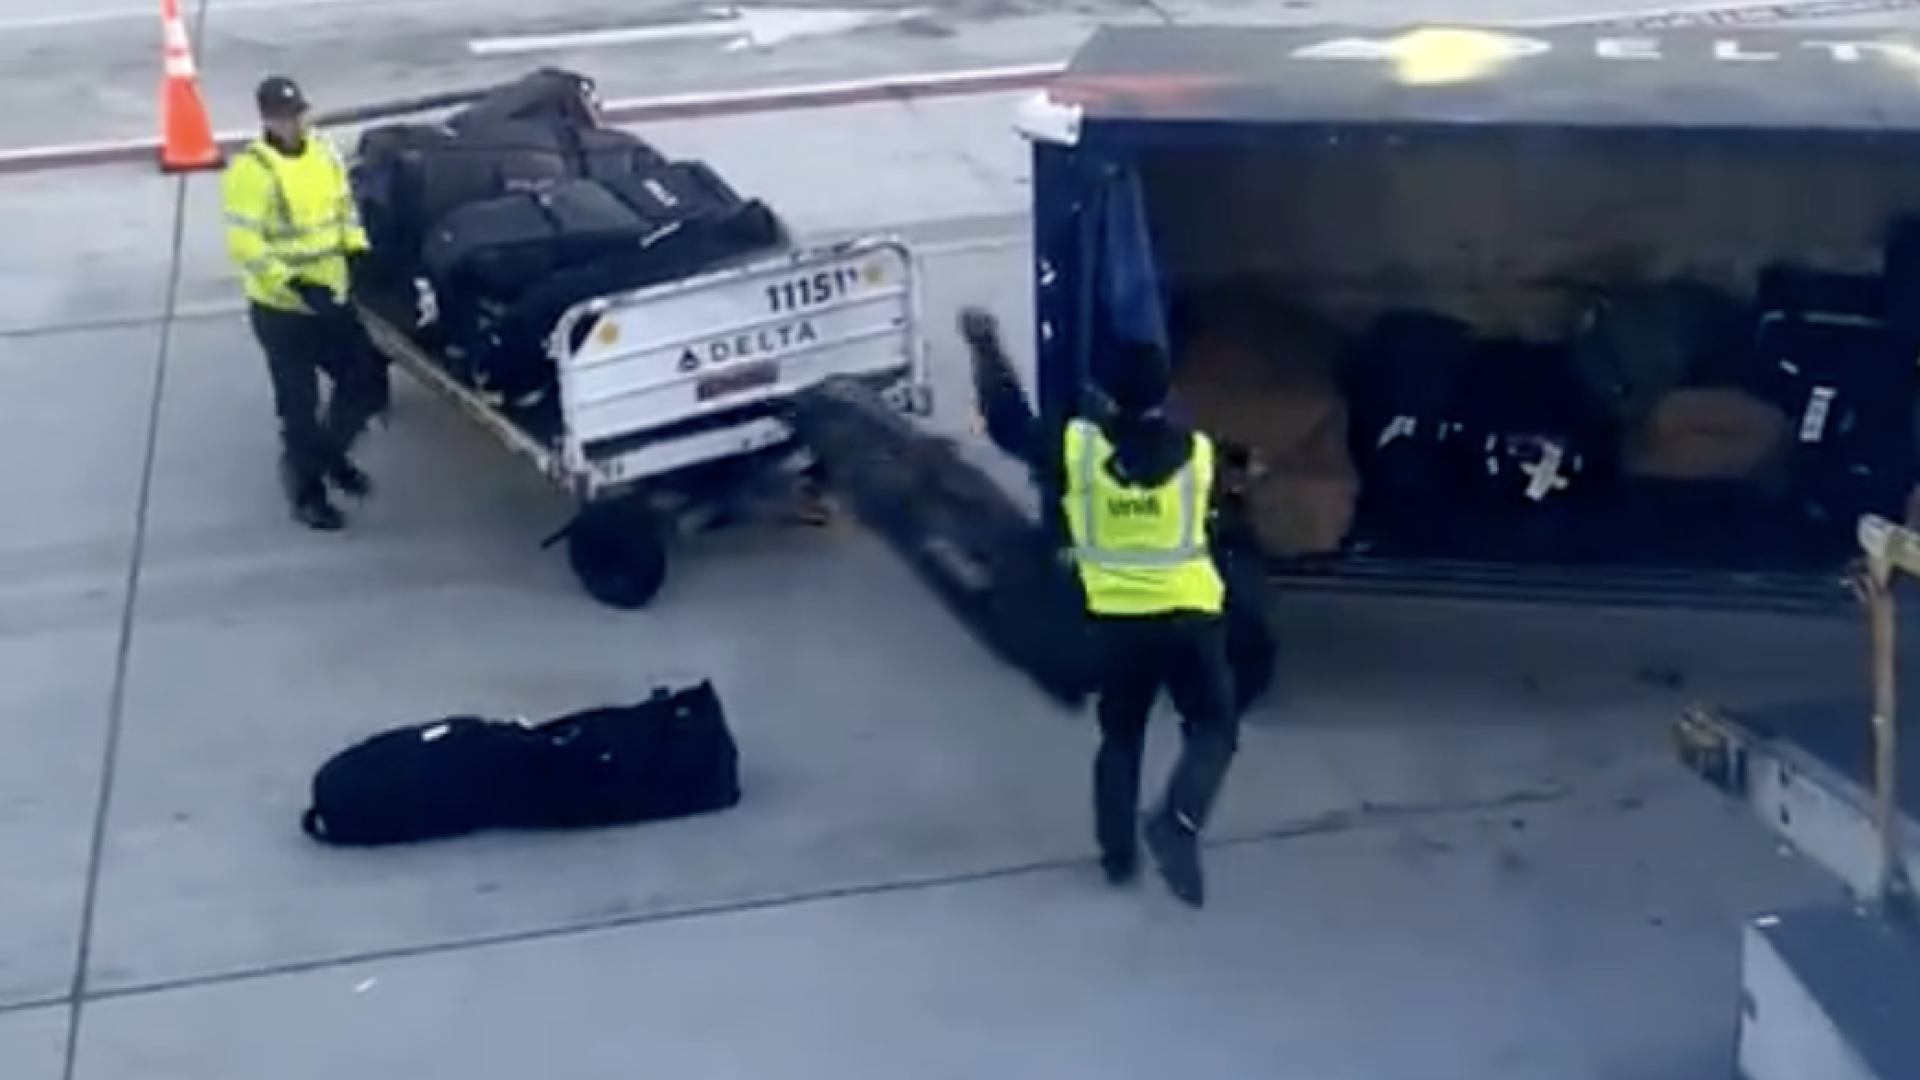 East Tennessee State shares video of golf bags being chucked by airlines baggage handler